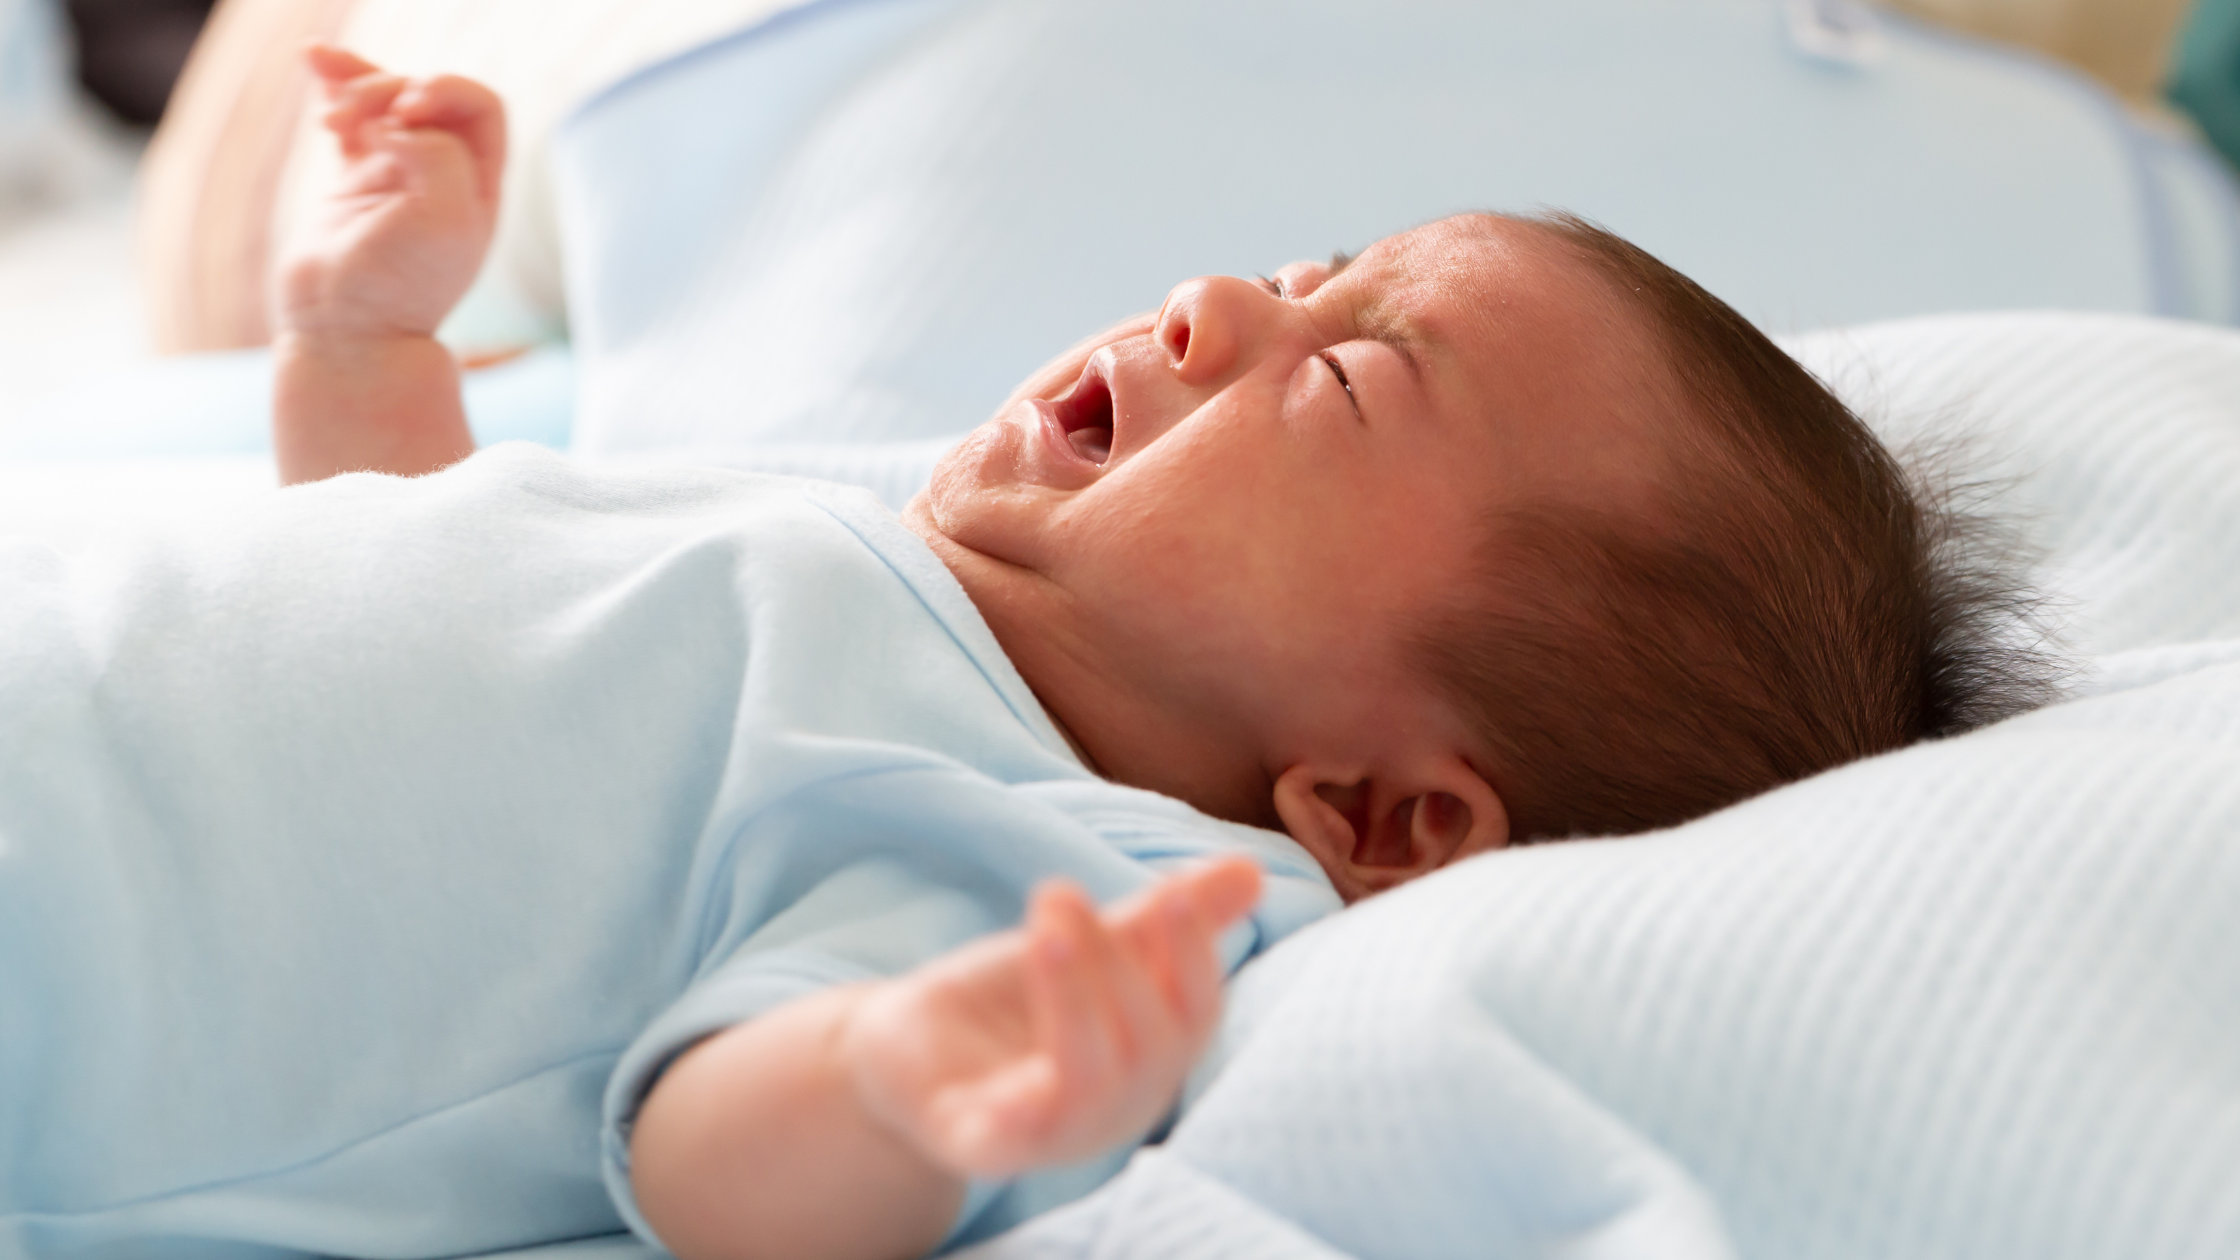 How to Soothe a Colicky Baby